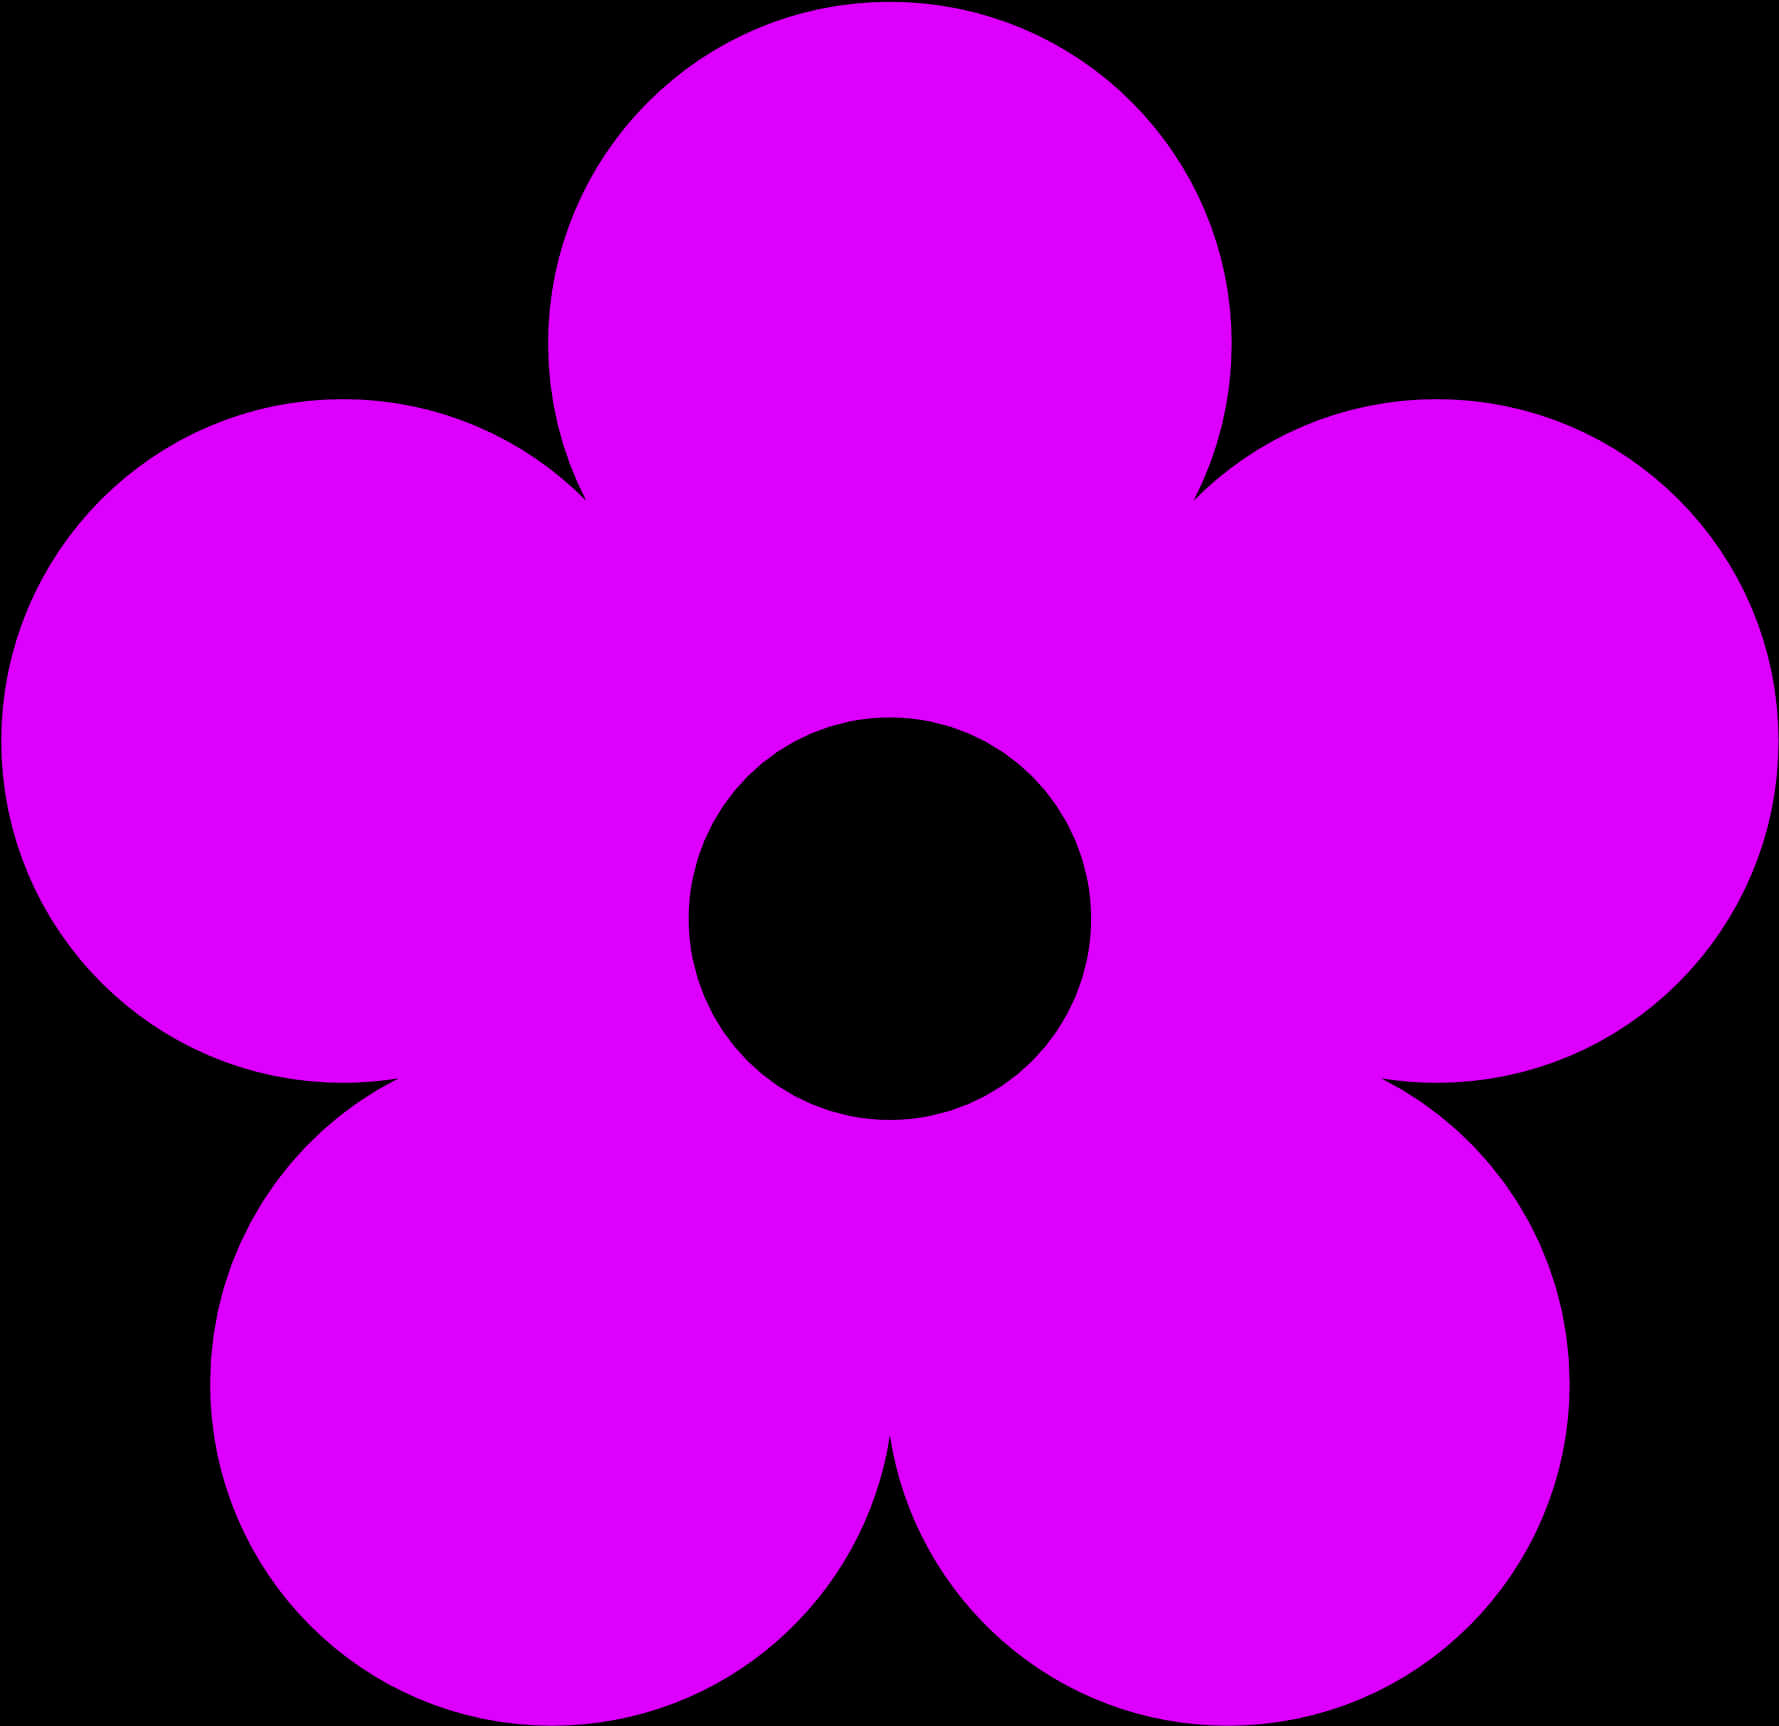 A Purple Flower With A Black Center